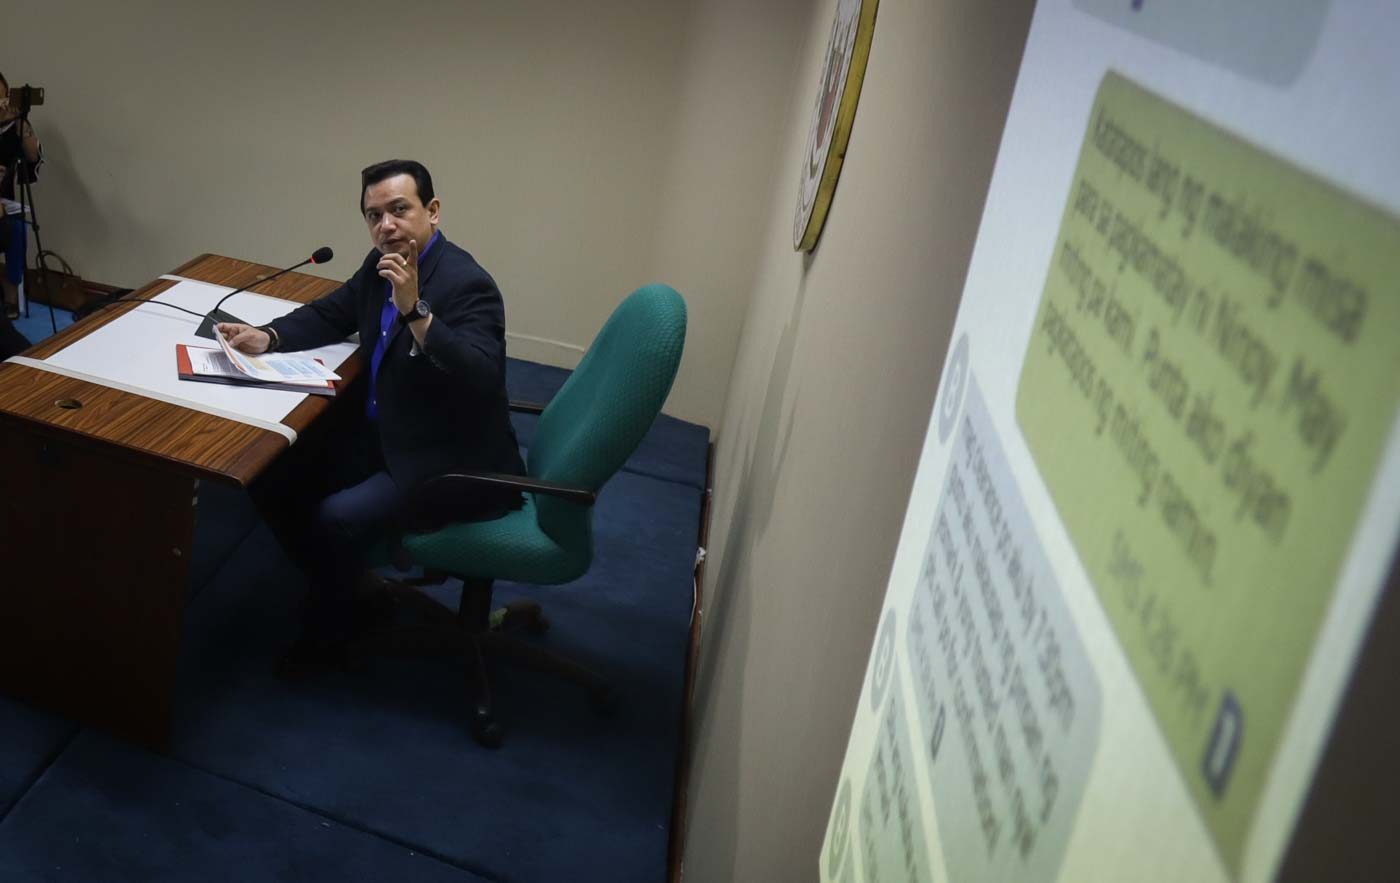 Trillanes bares Bikoy texts disputing ouster plot claims